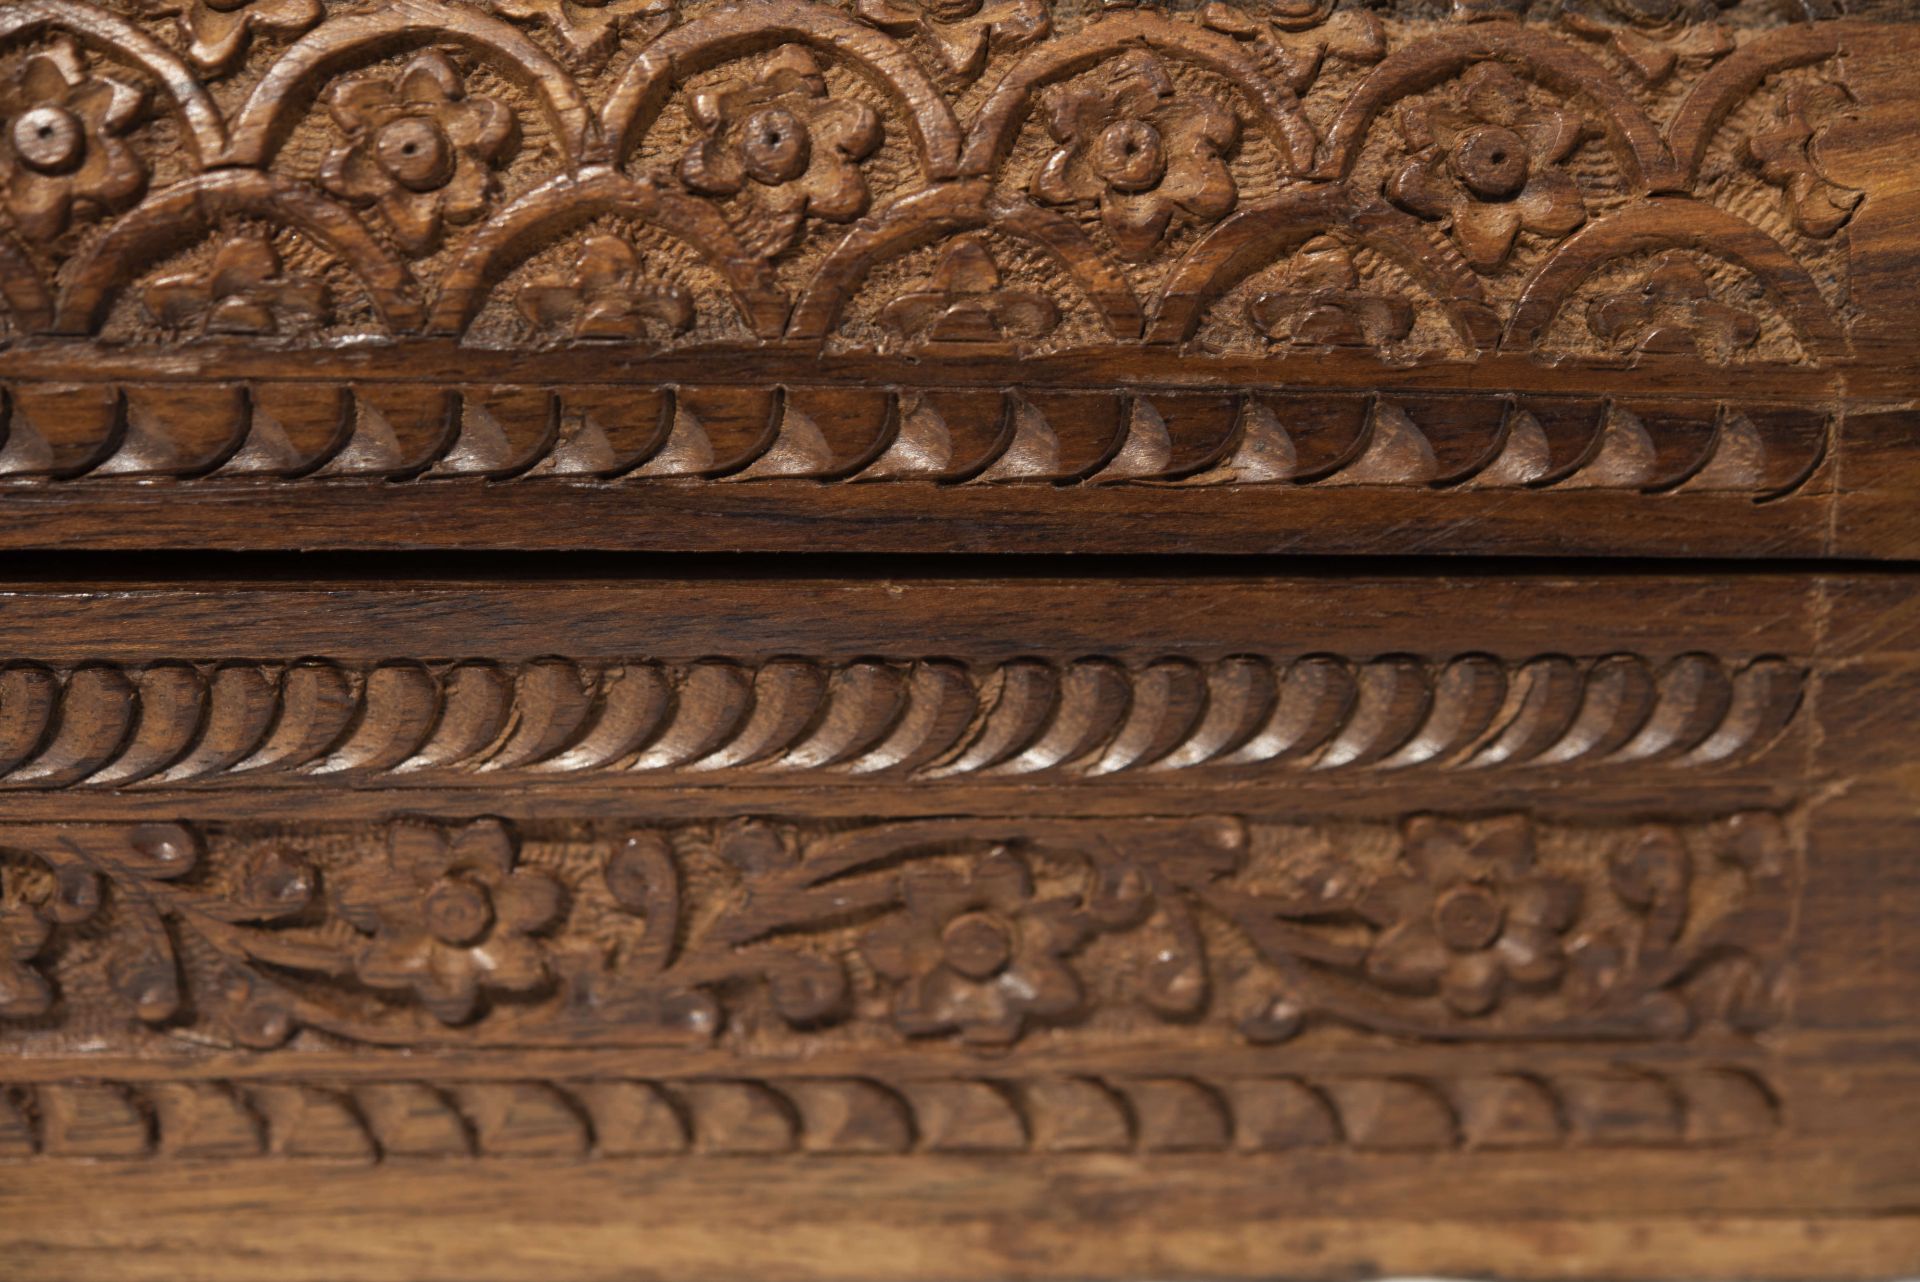 Holzkiste aus Rosenholz Asiatische Schnitzmotive | Rosewood Box with Carved Asian Motifs - Image 5 of 5